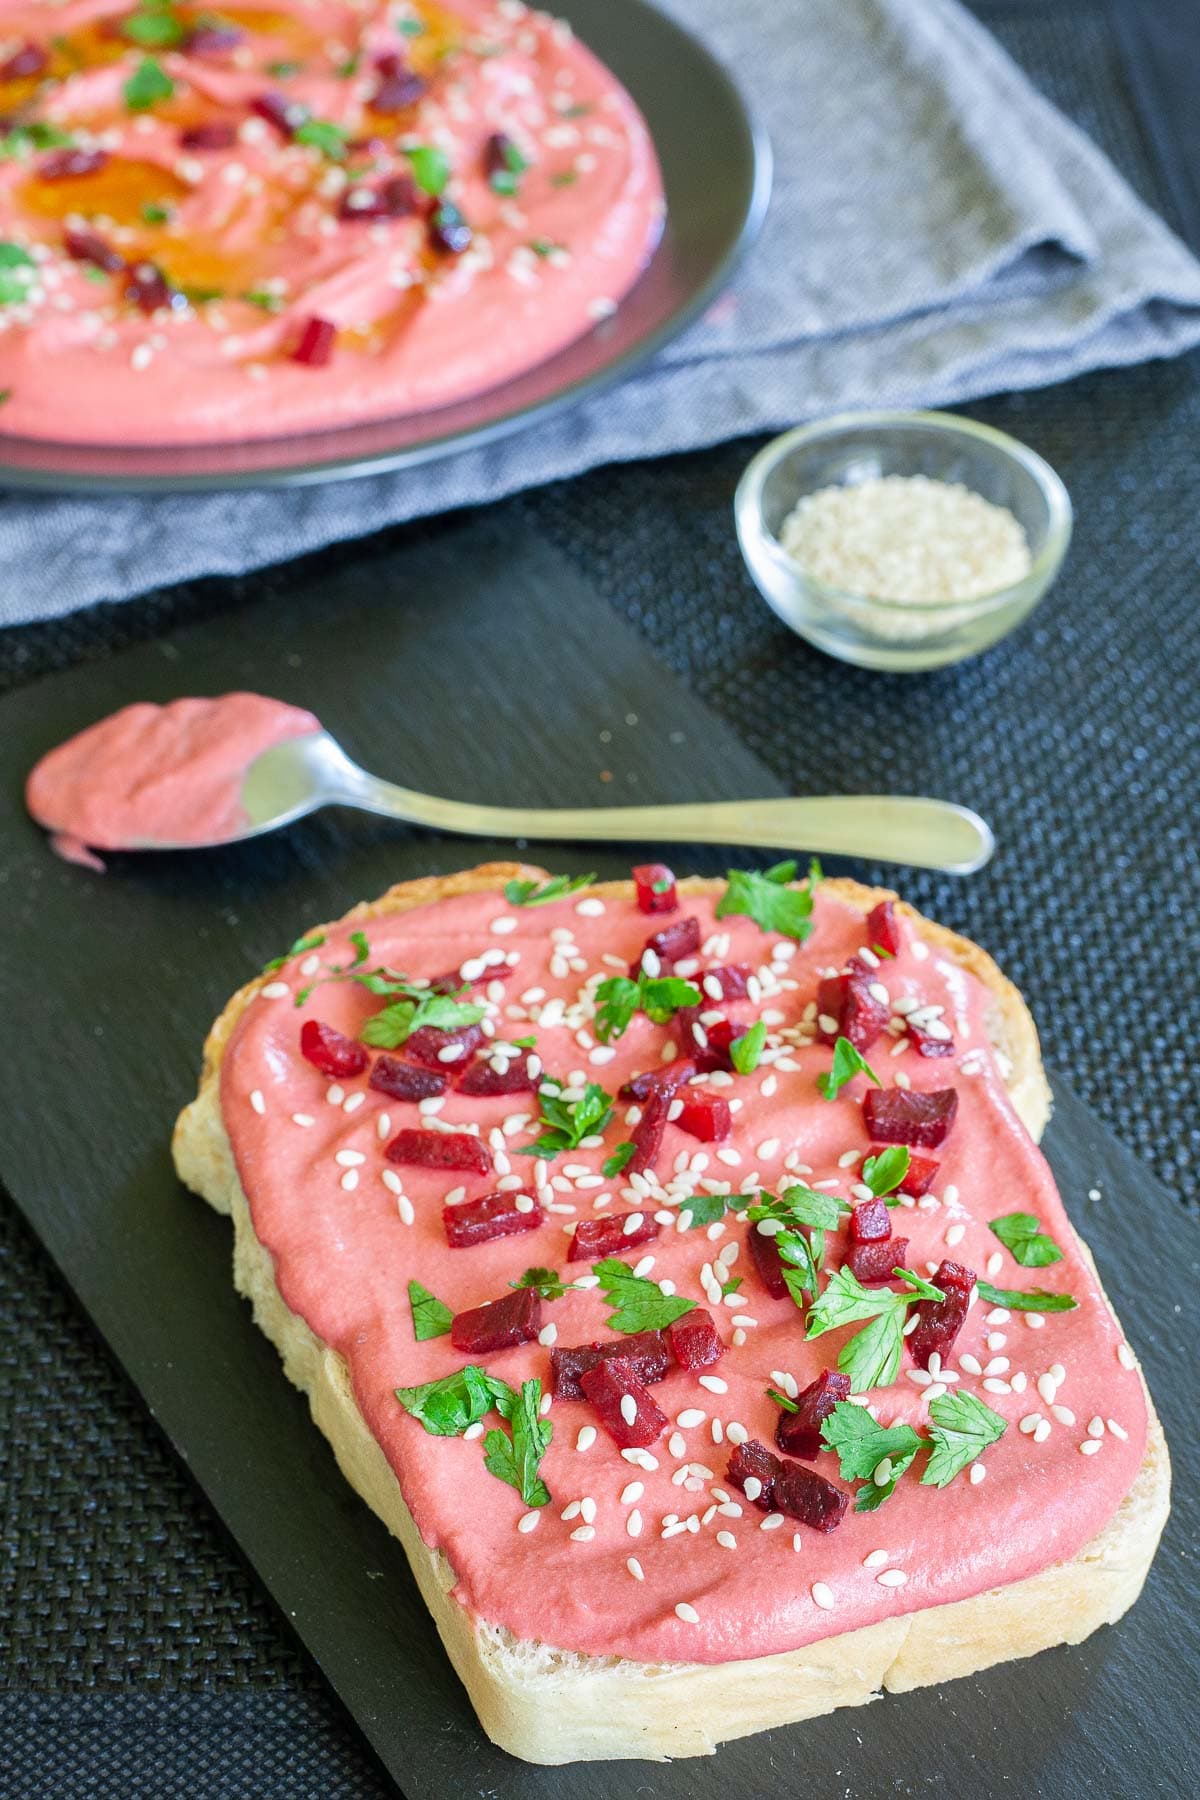 A slice of bread with pink hummus, sprinkled with freshly chopped parsley, sesame seeds and small roasted beet pieces